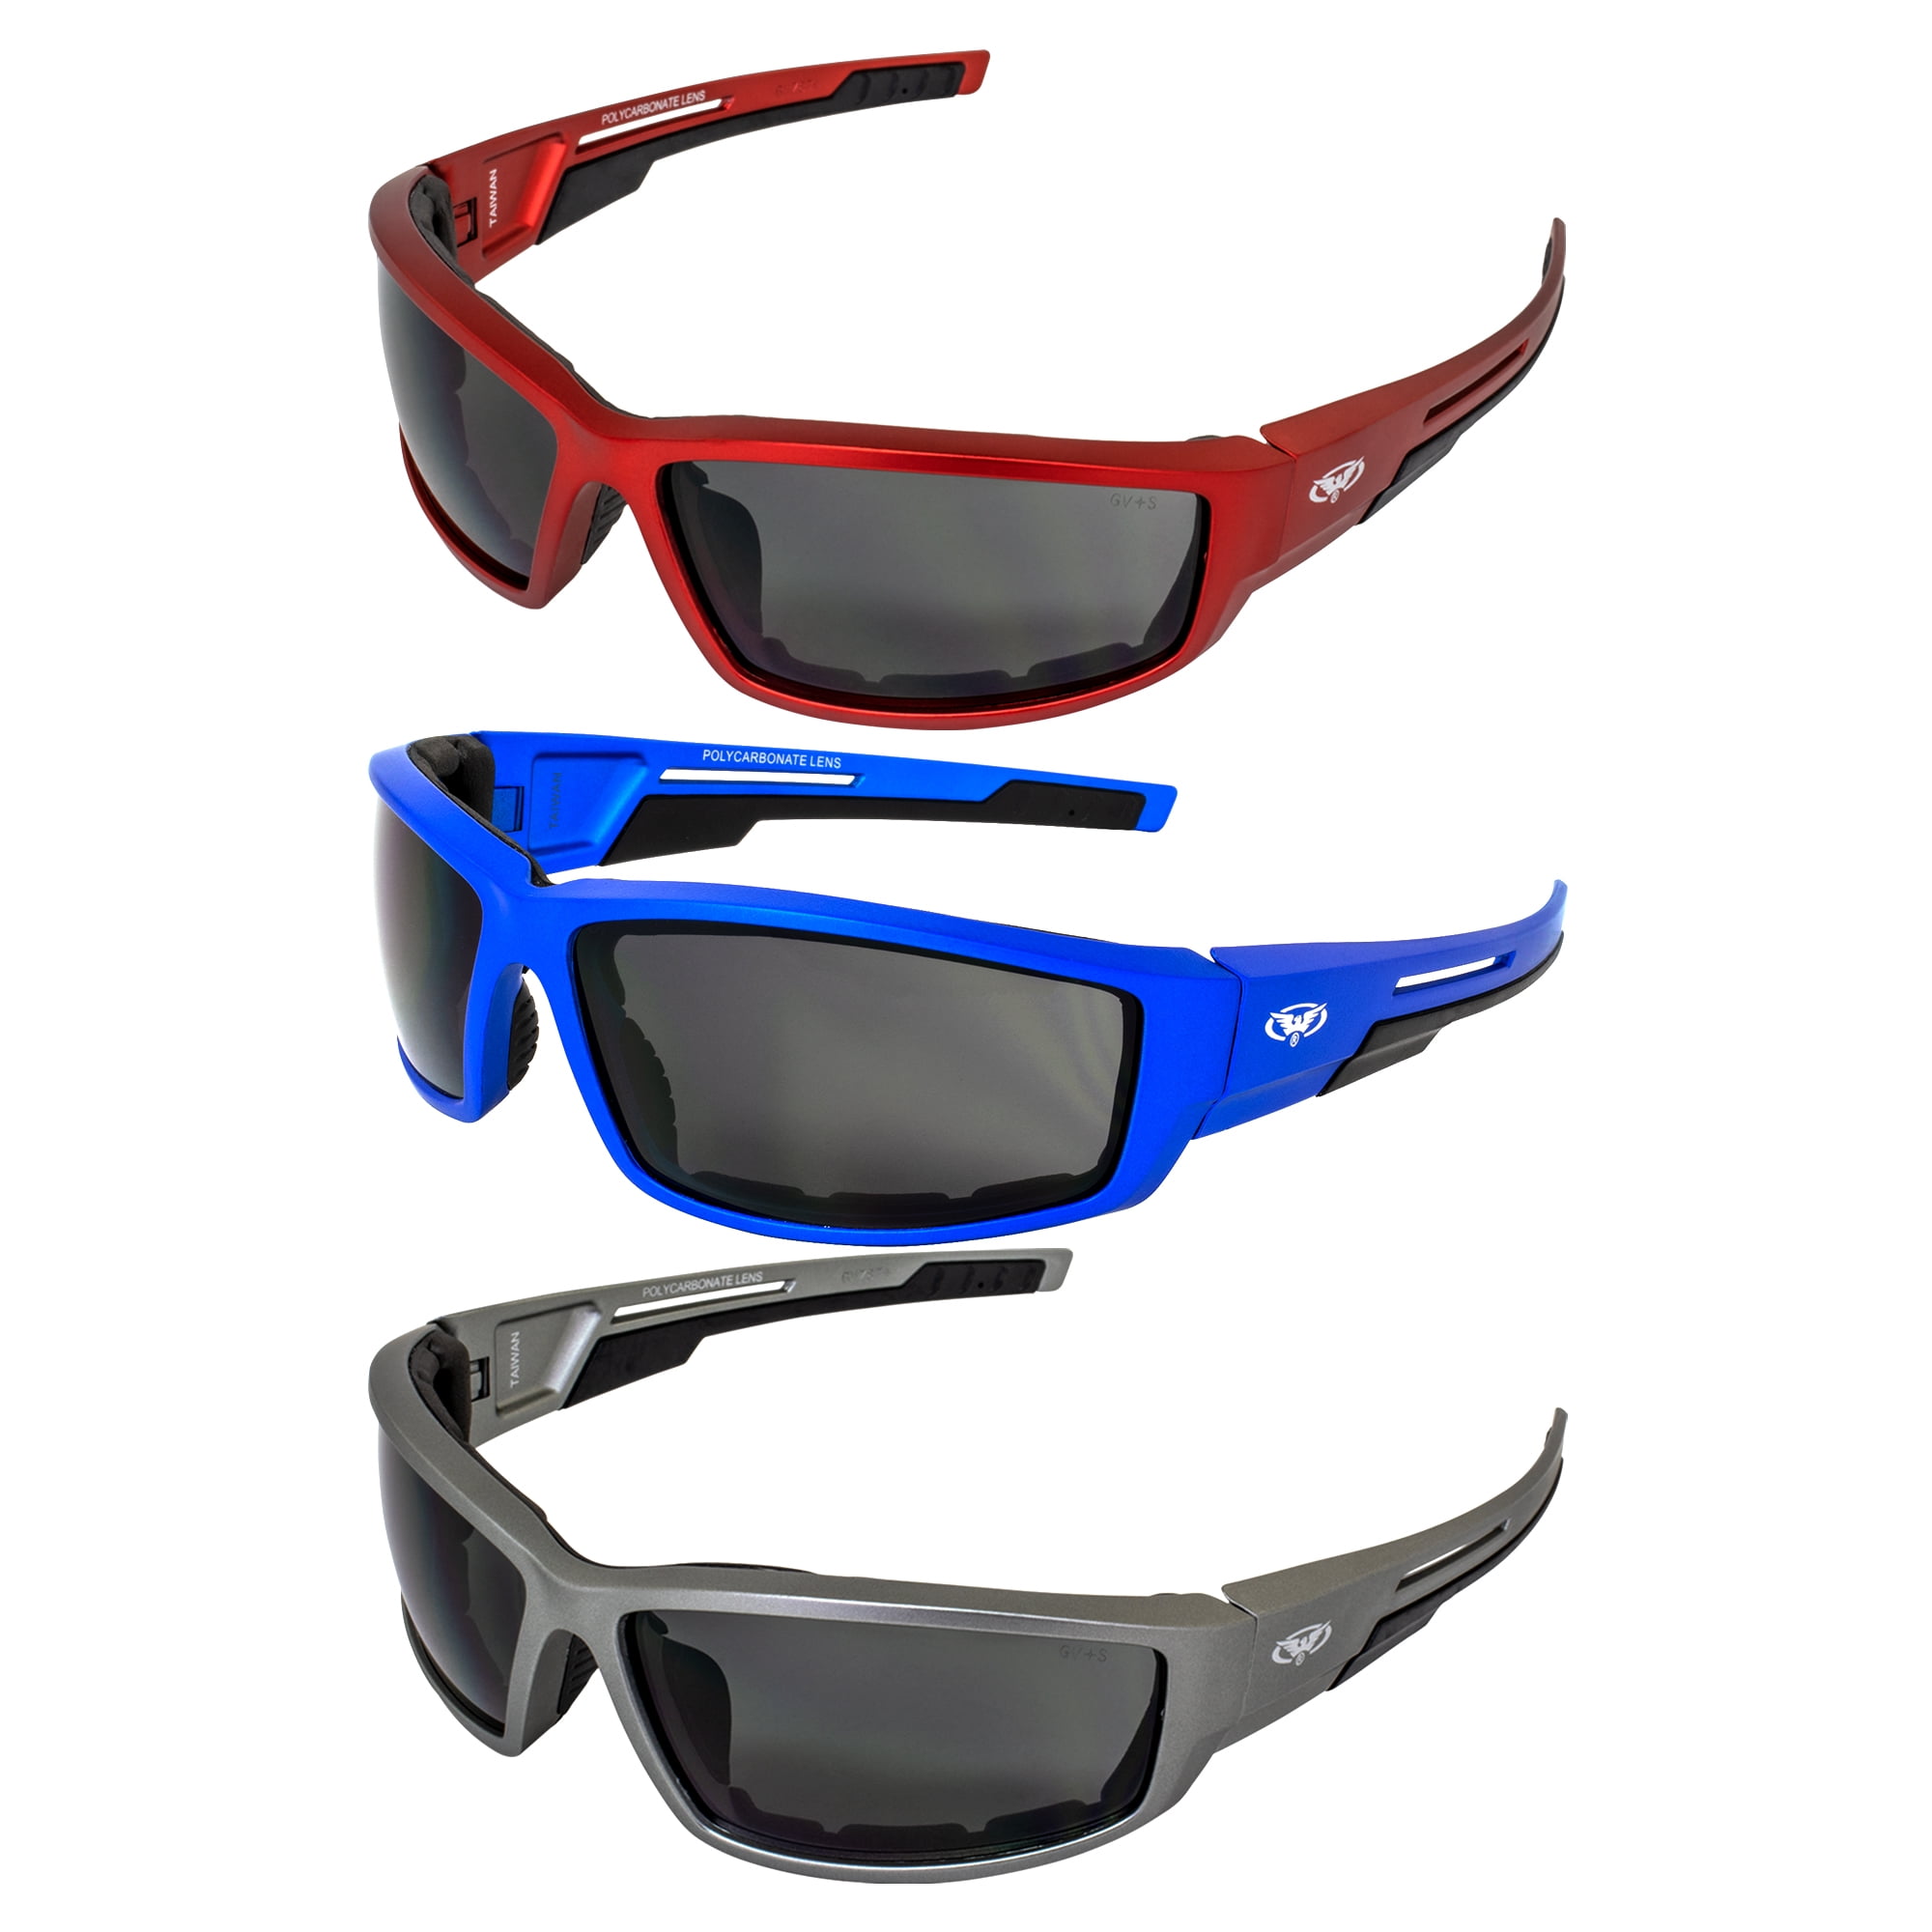 2 Pair Sly Padded Motorcycle Riding Sunglasses Smoke Lenses Red and Blue Frames 